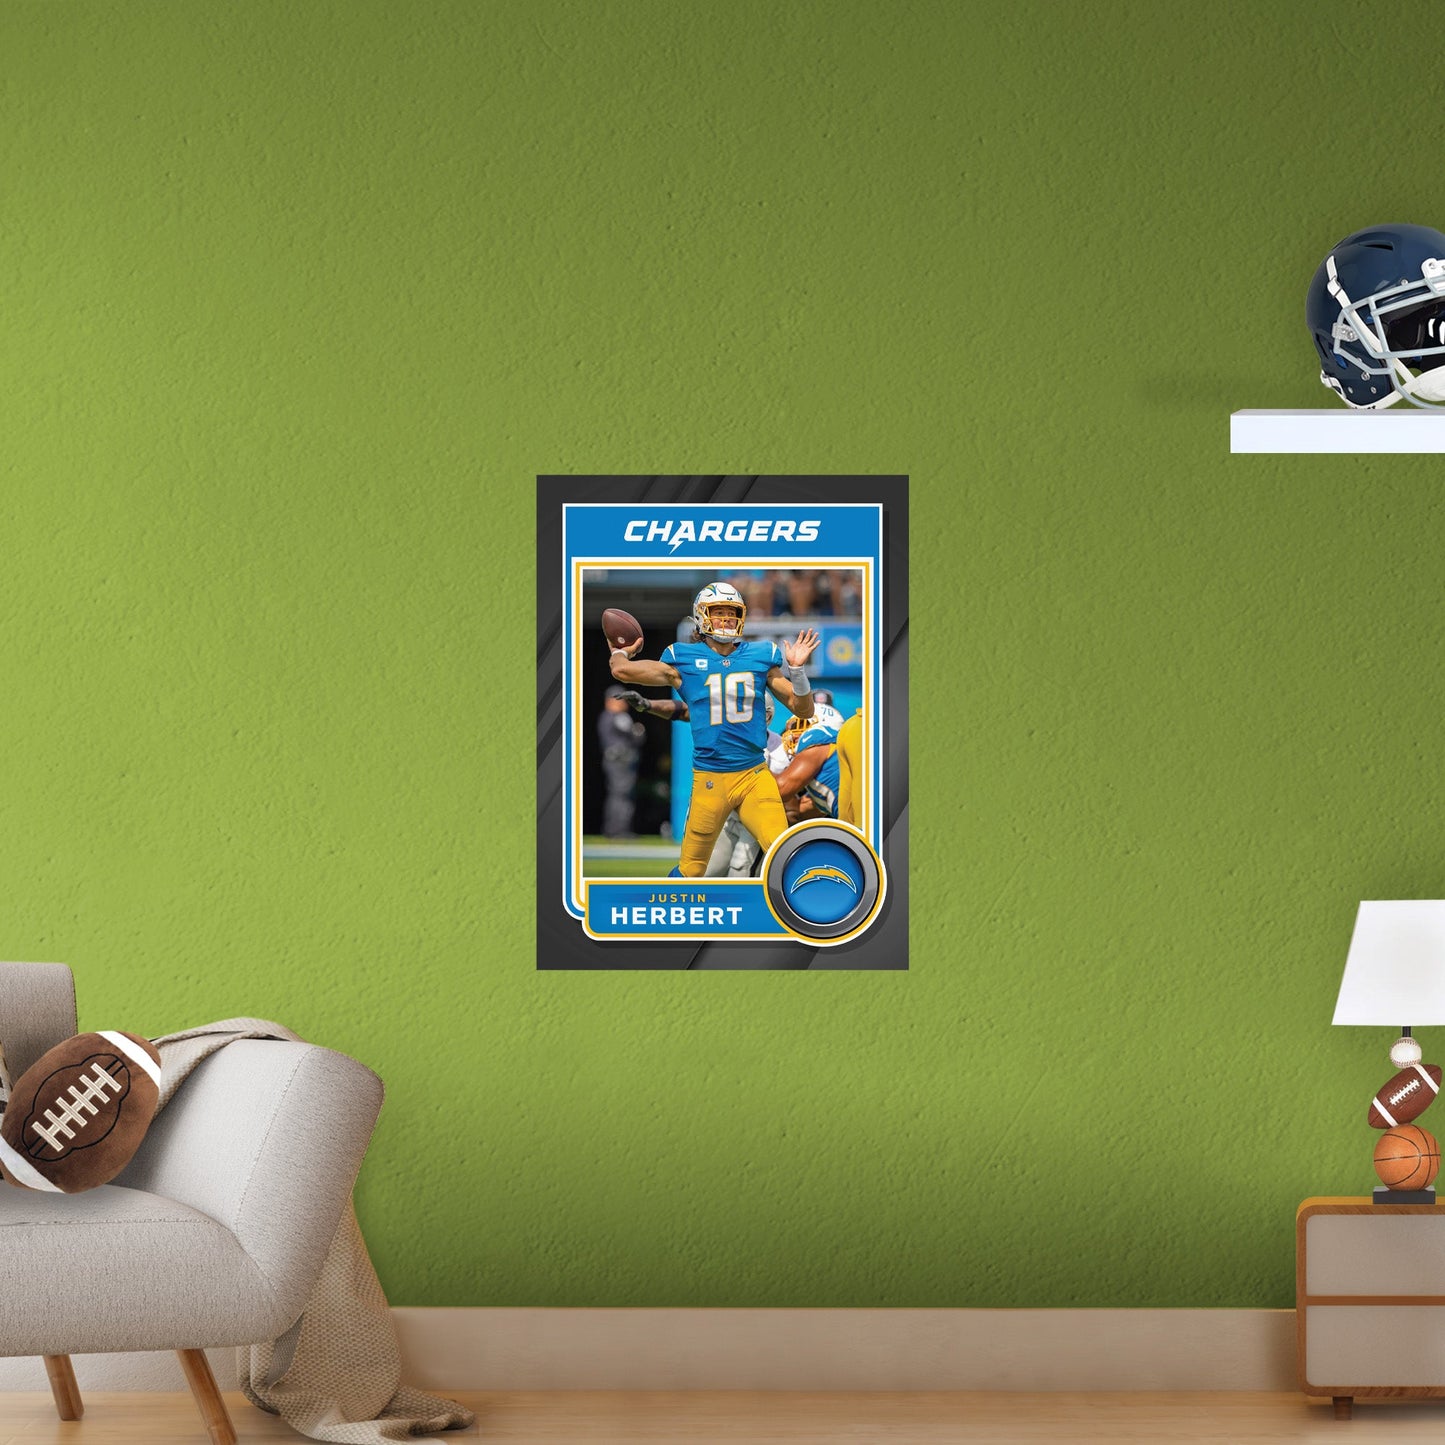 Los Angeles Chargers: Justin Herbert Poster - Officially Licensed NFL Removable Adhesive Decal